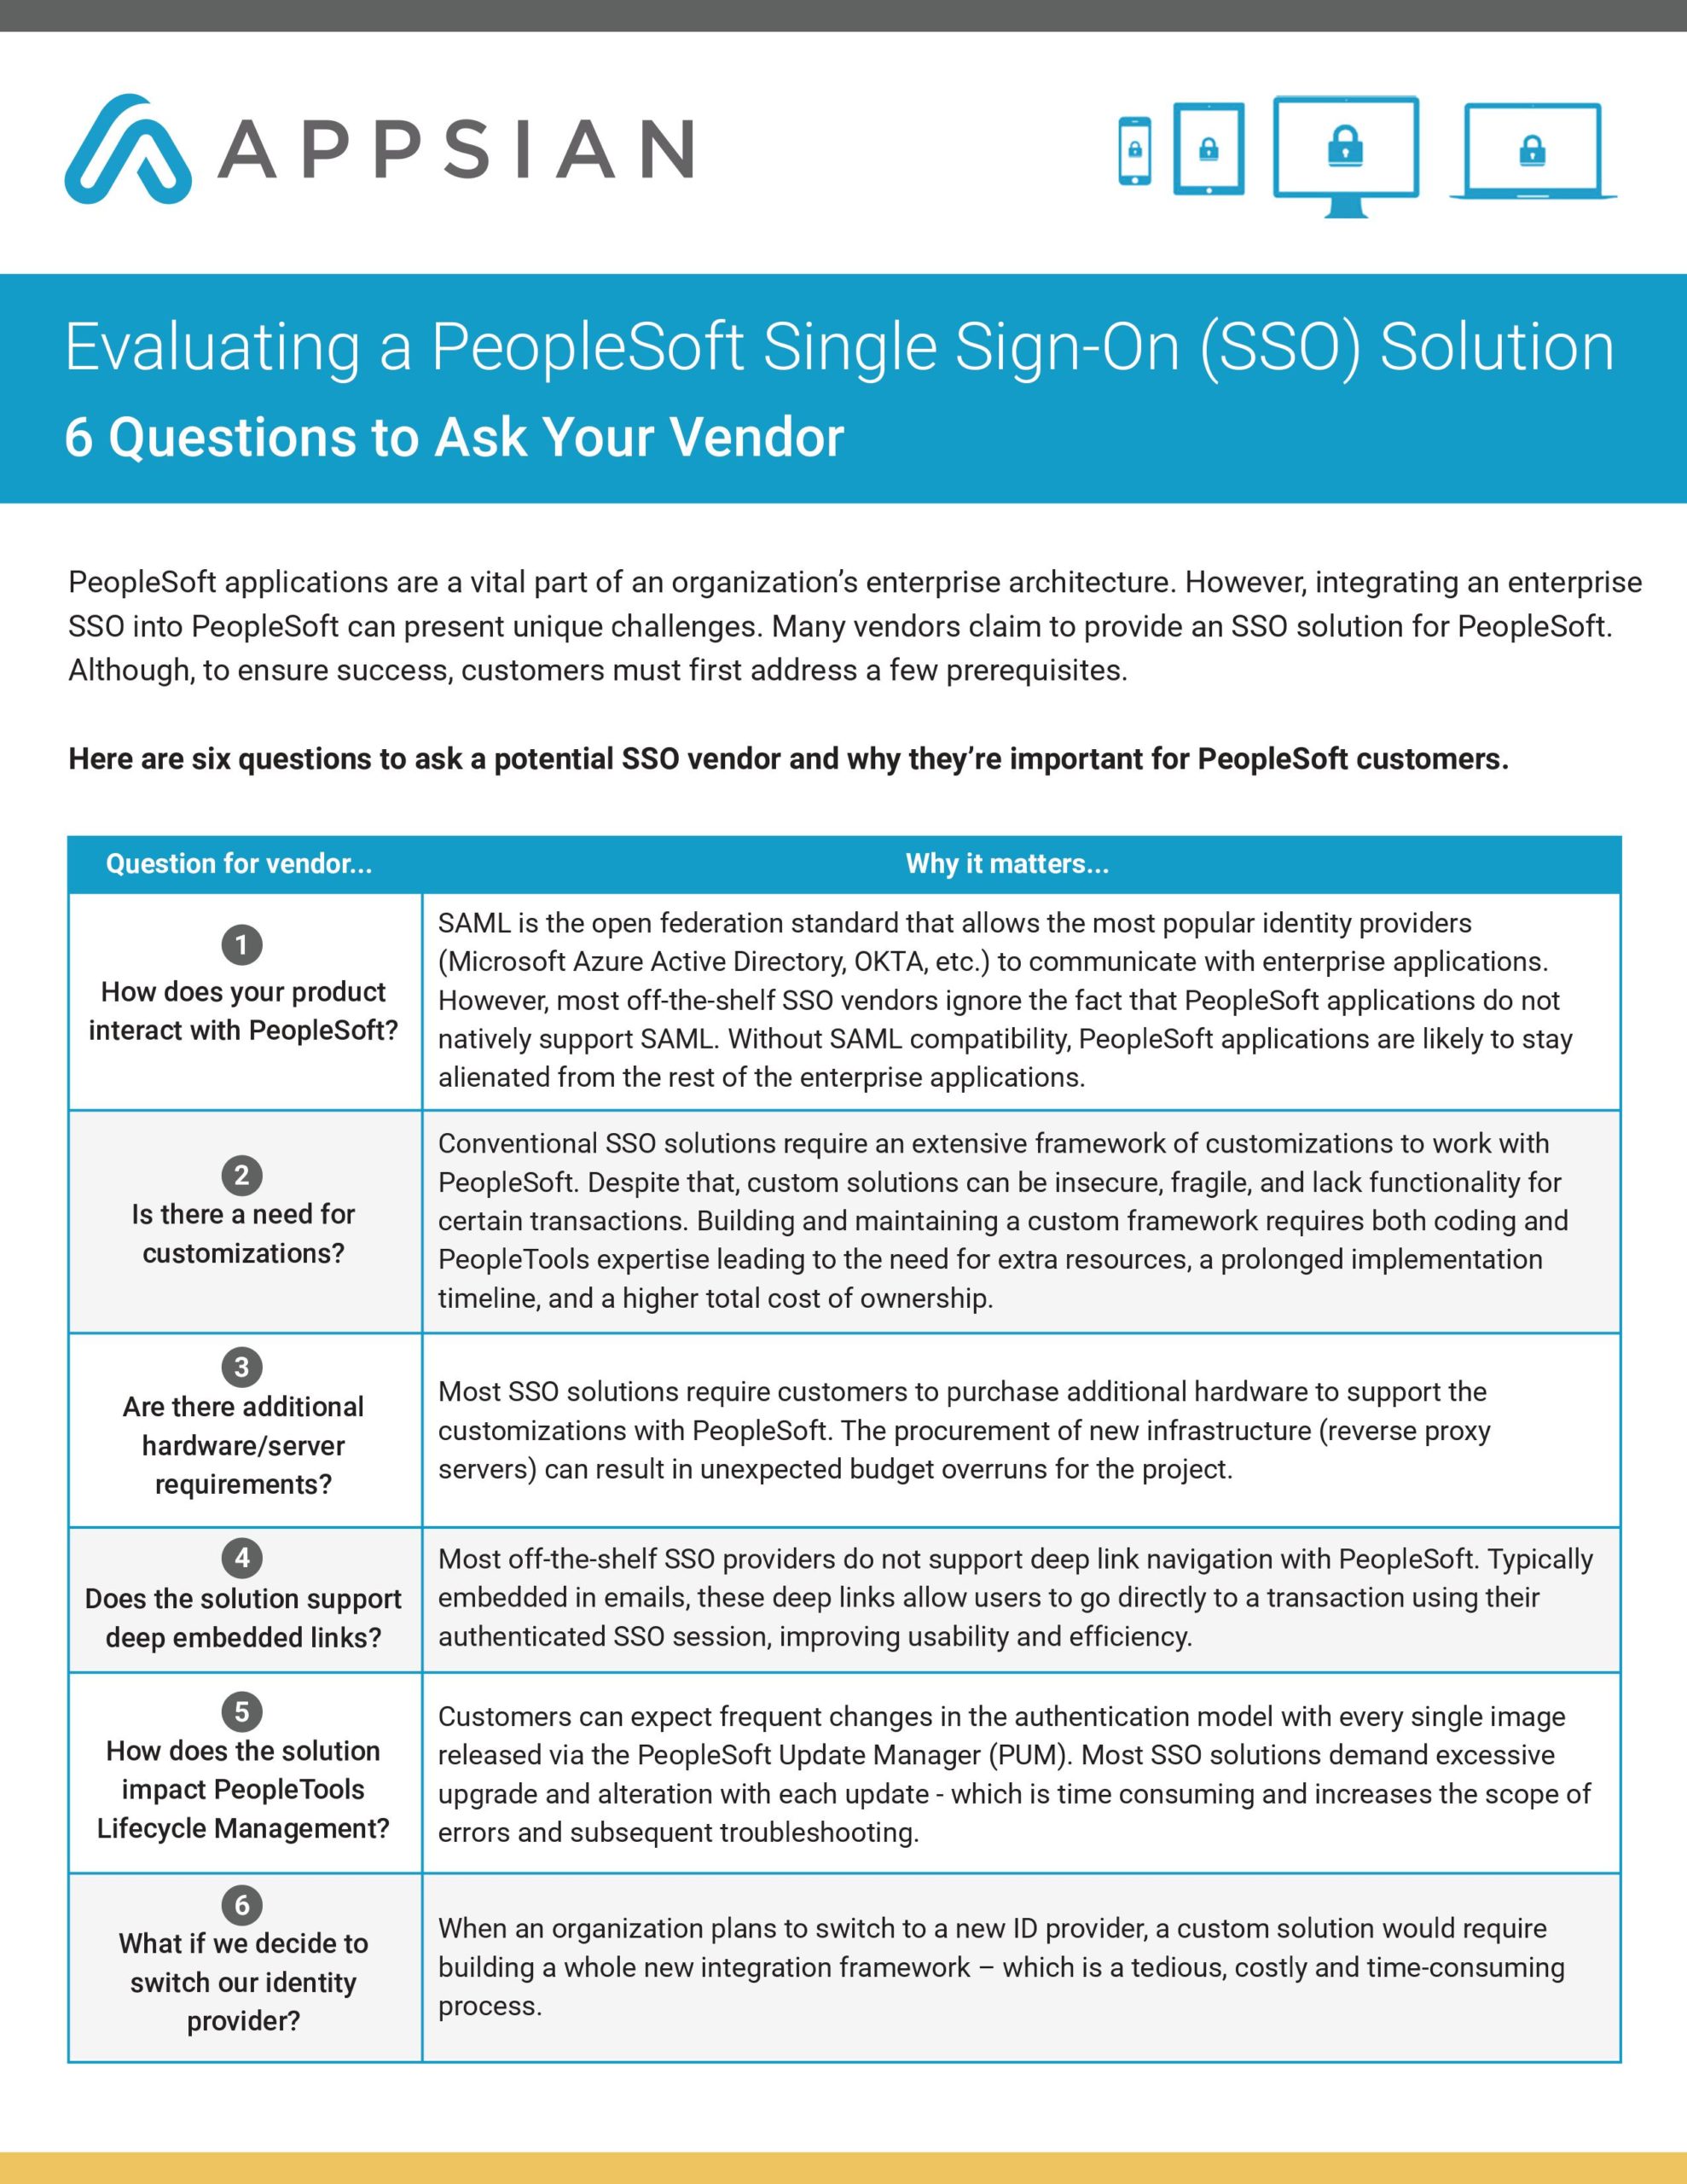 Evaluating an SSO for PeopleSoft? Here are the 6 questions you should ask your potential vendors